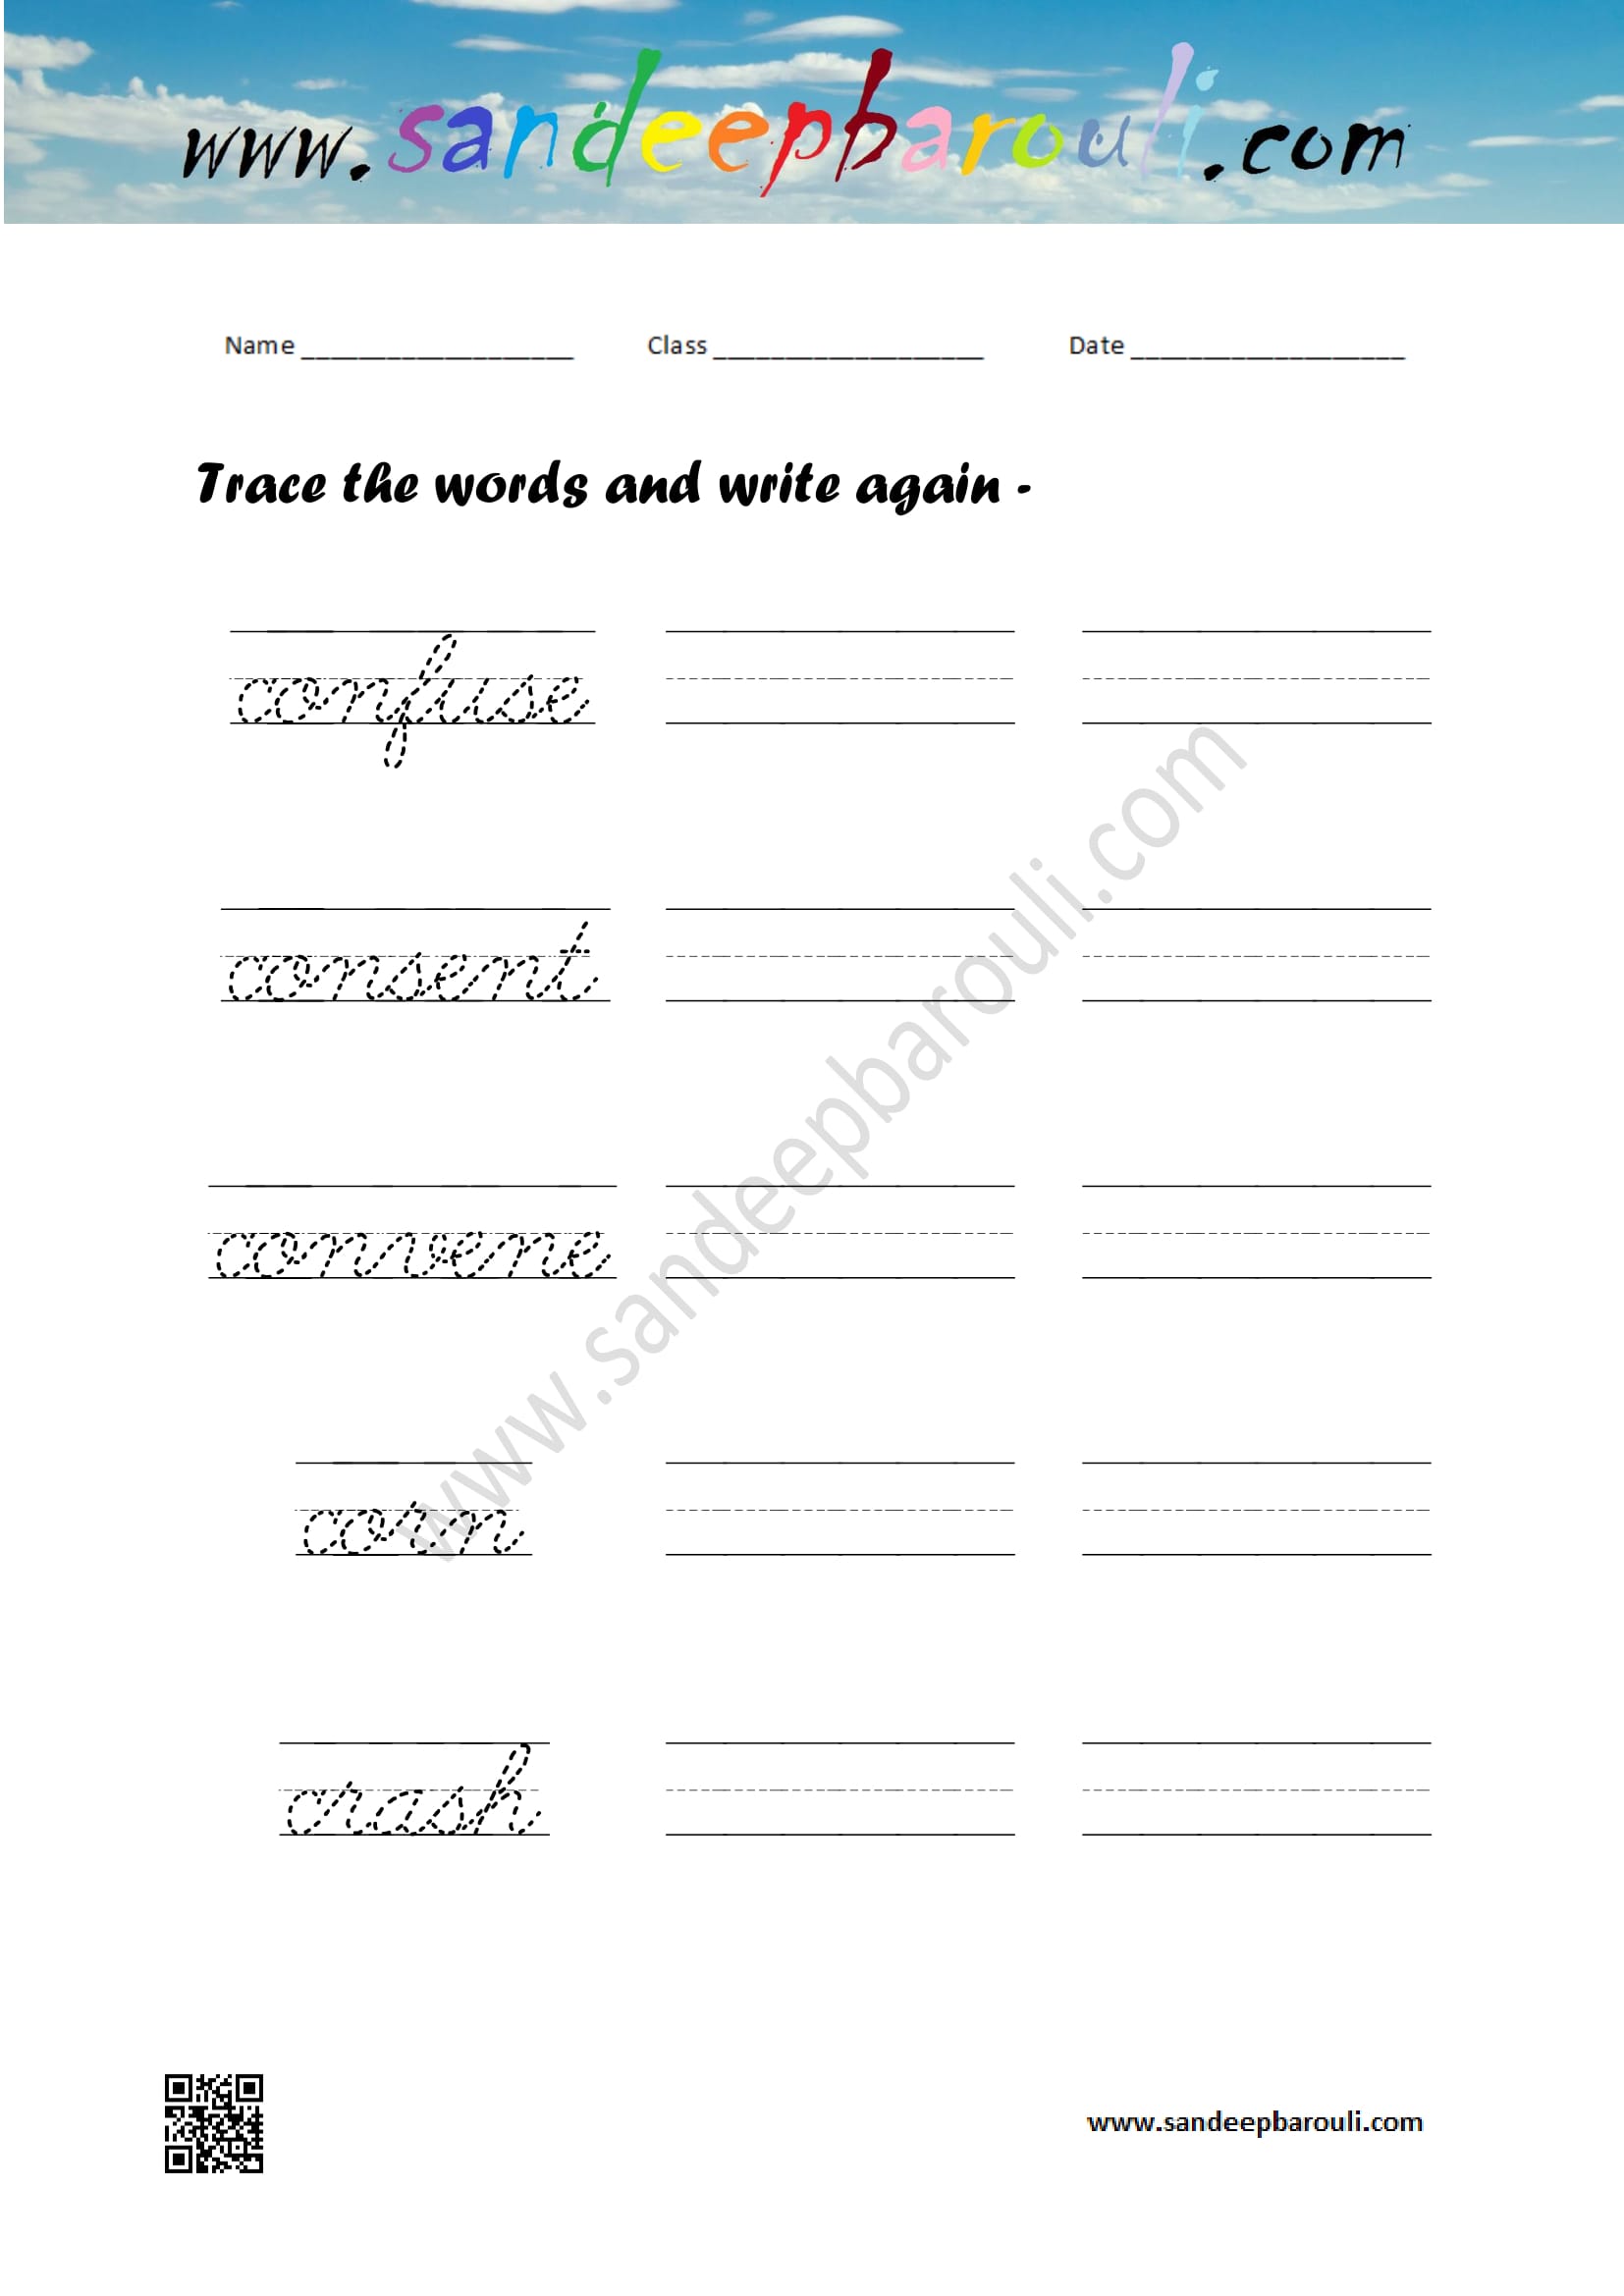 Cursive writing worksheet – trace the words and write again (92)